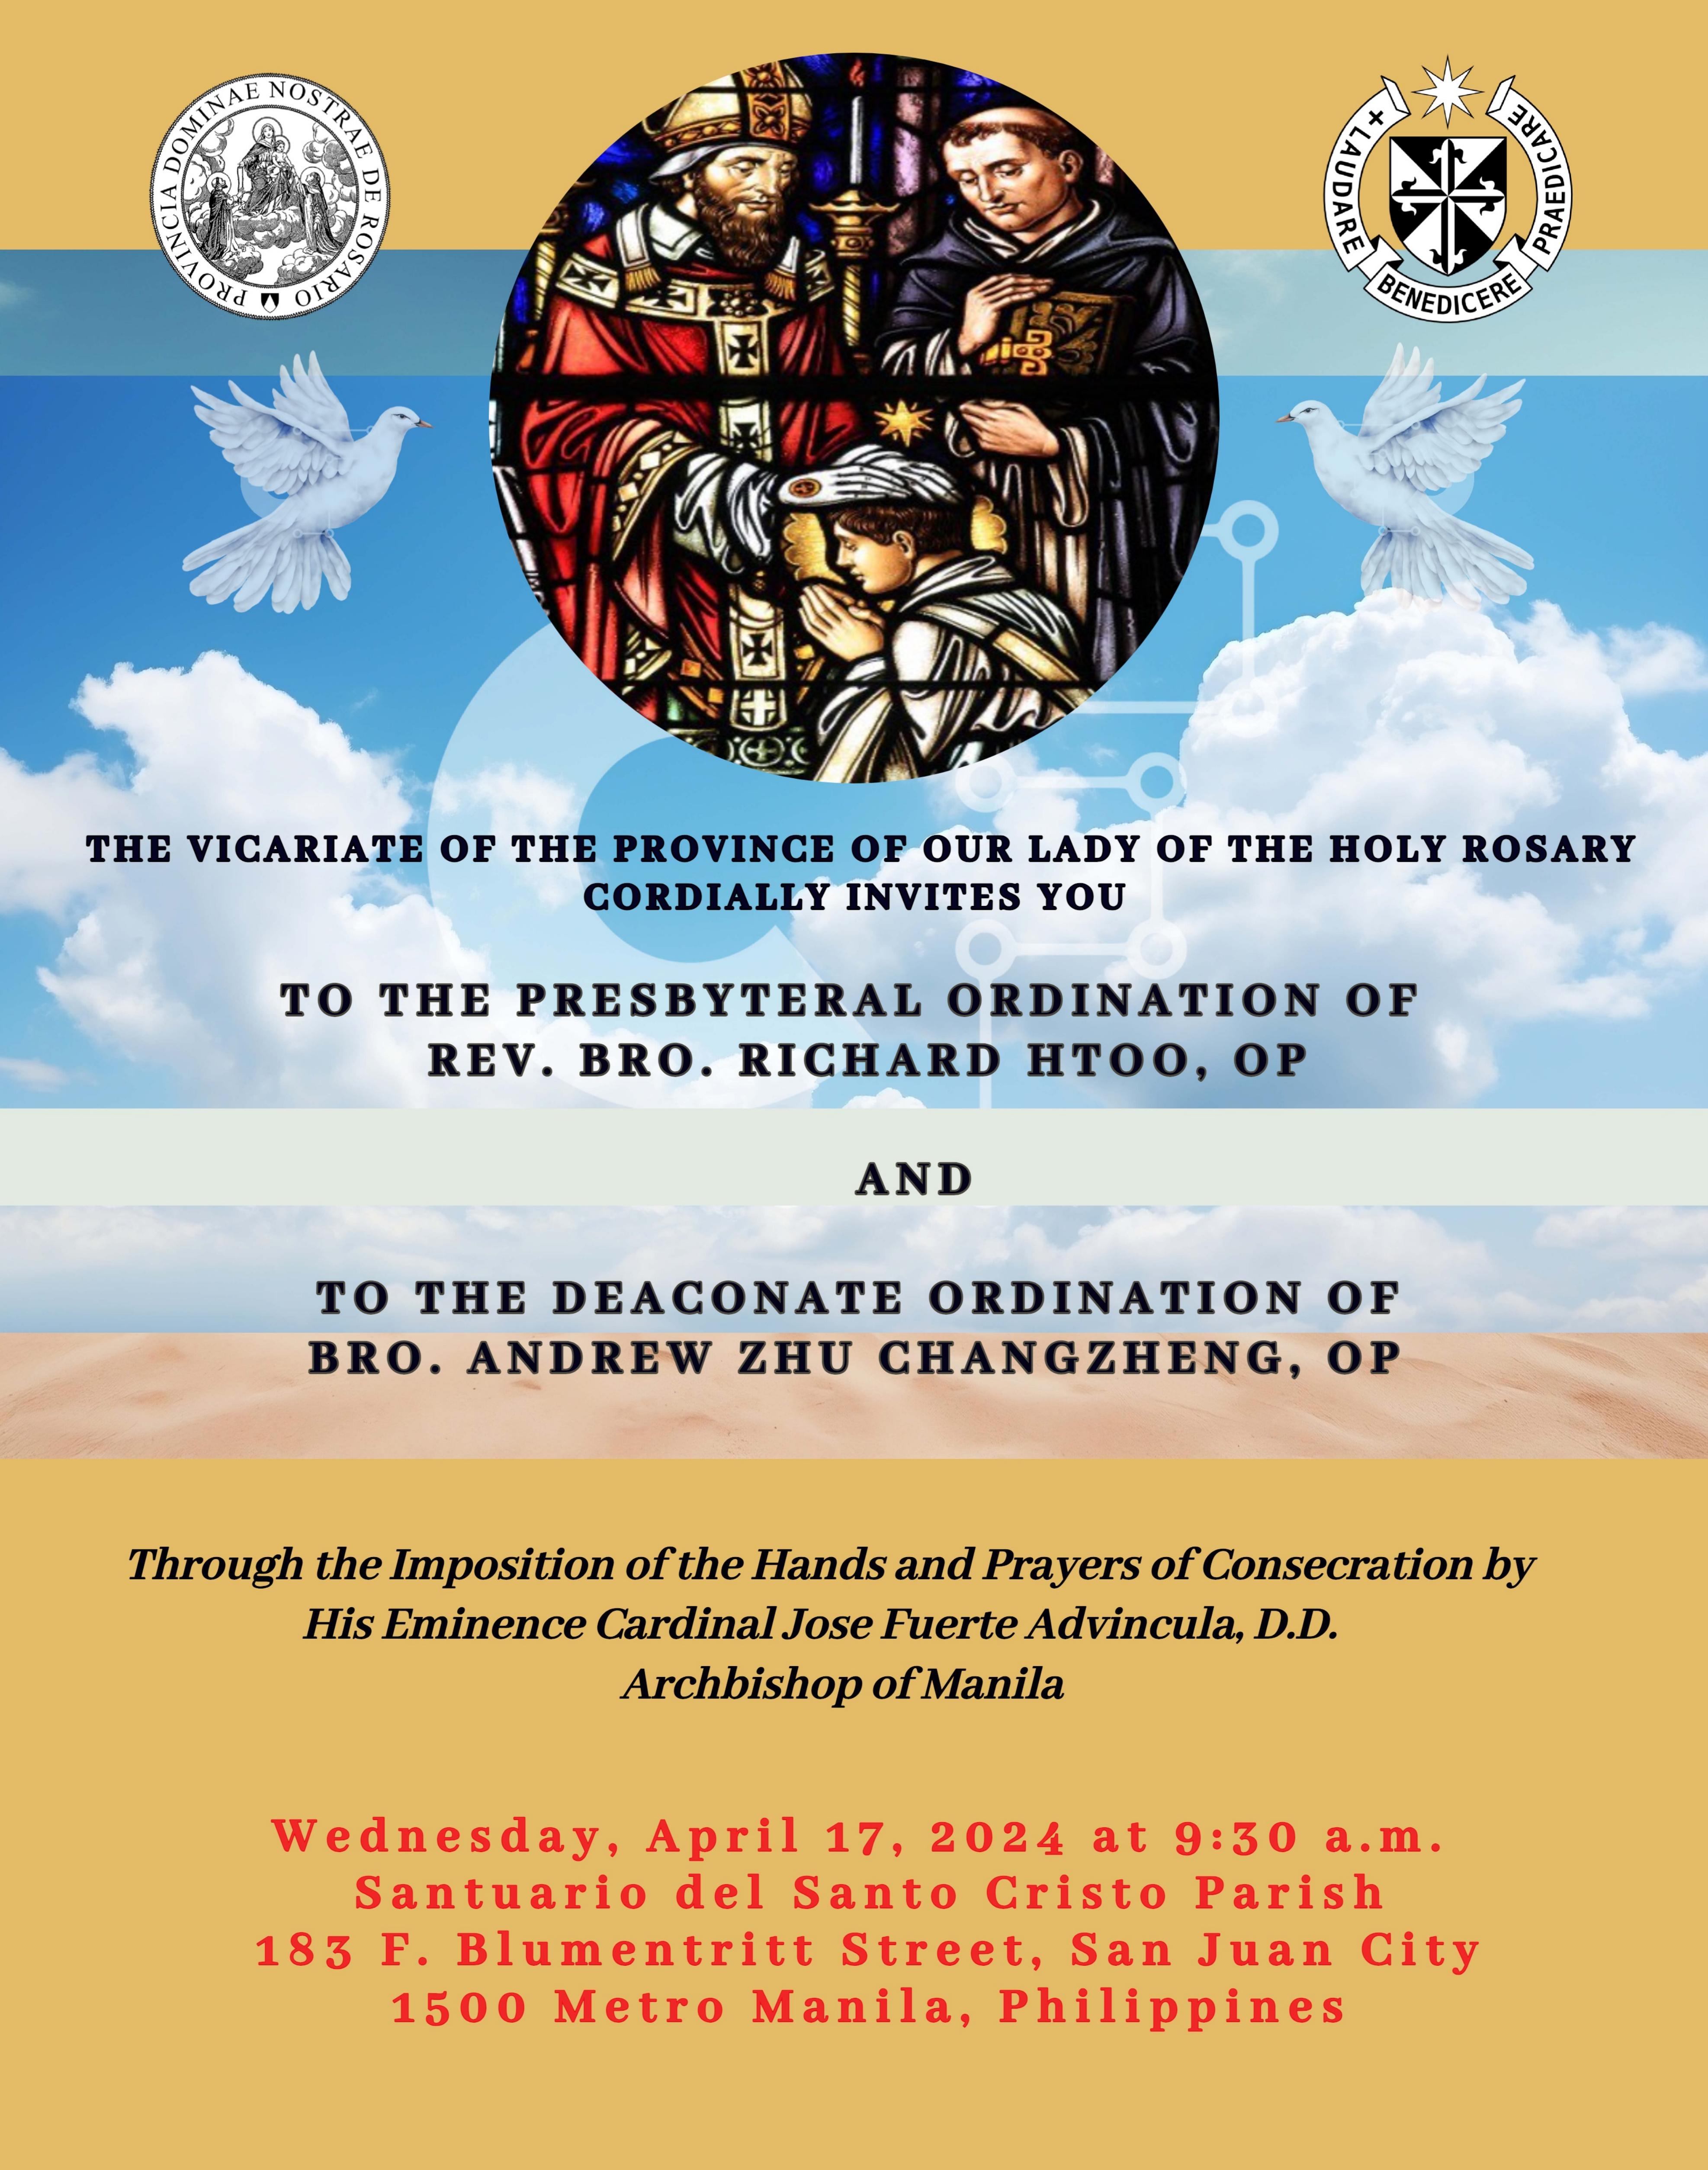 Invitation card for the ordinations of the brothers in the Philippines